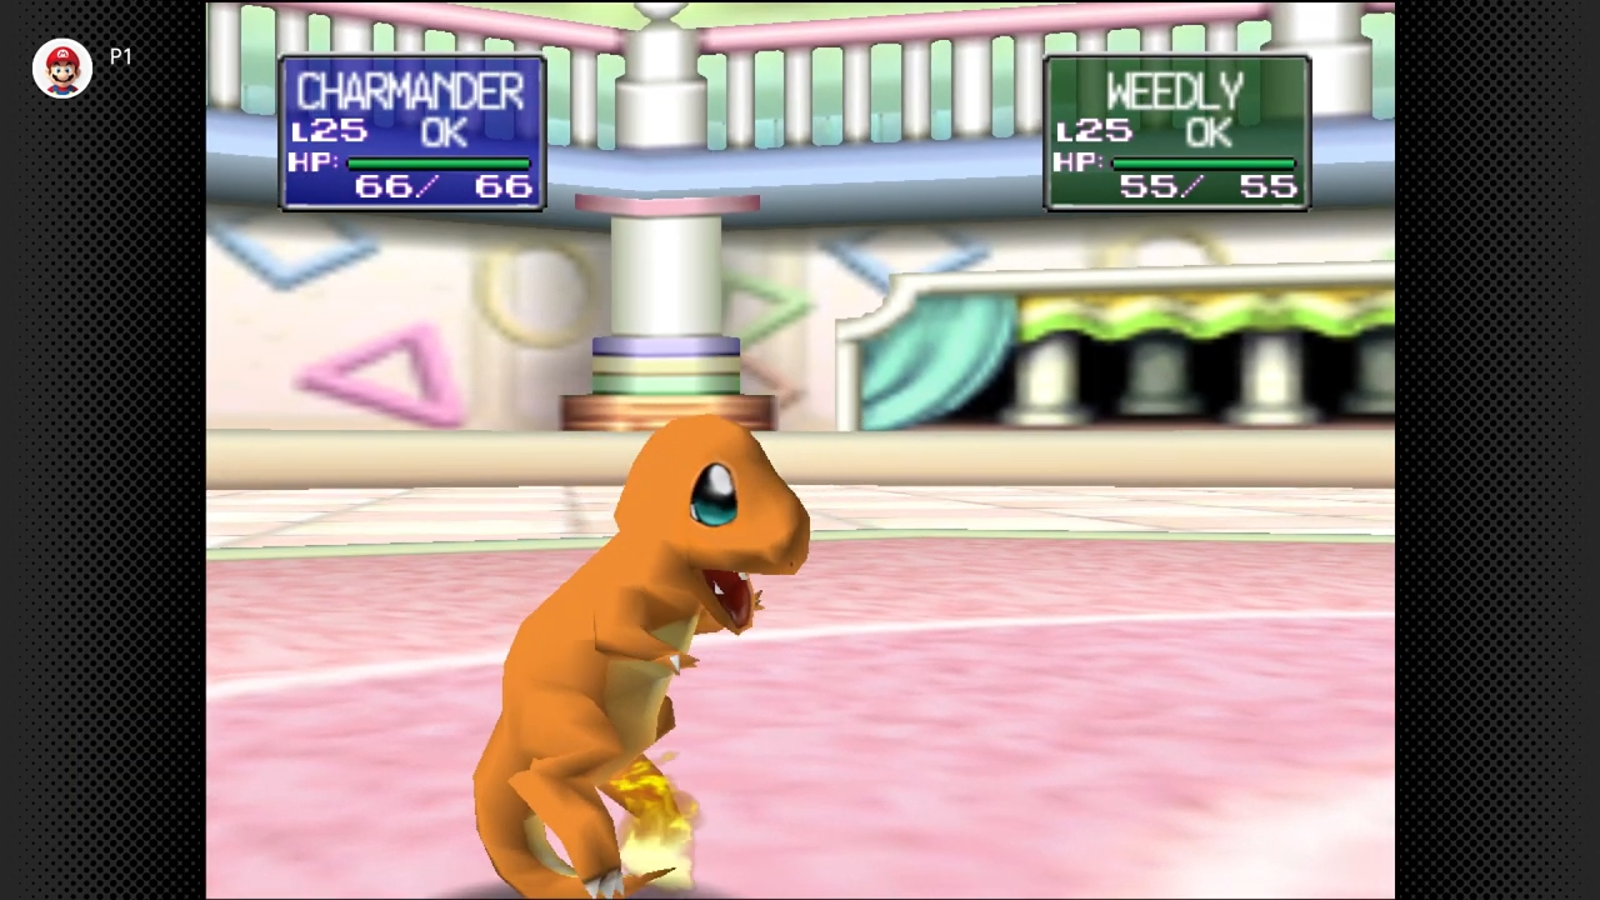 Battle your way to the top in Pokémon Stadium! Wallpaper